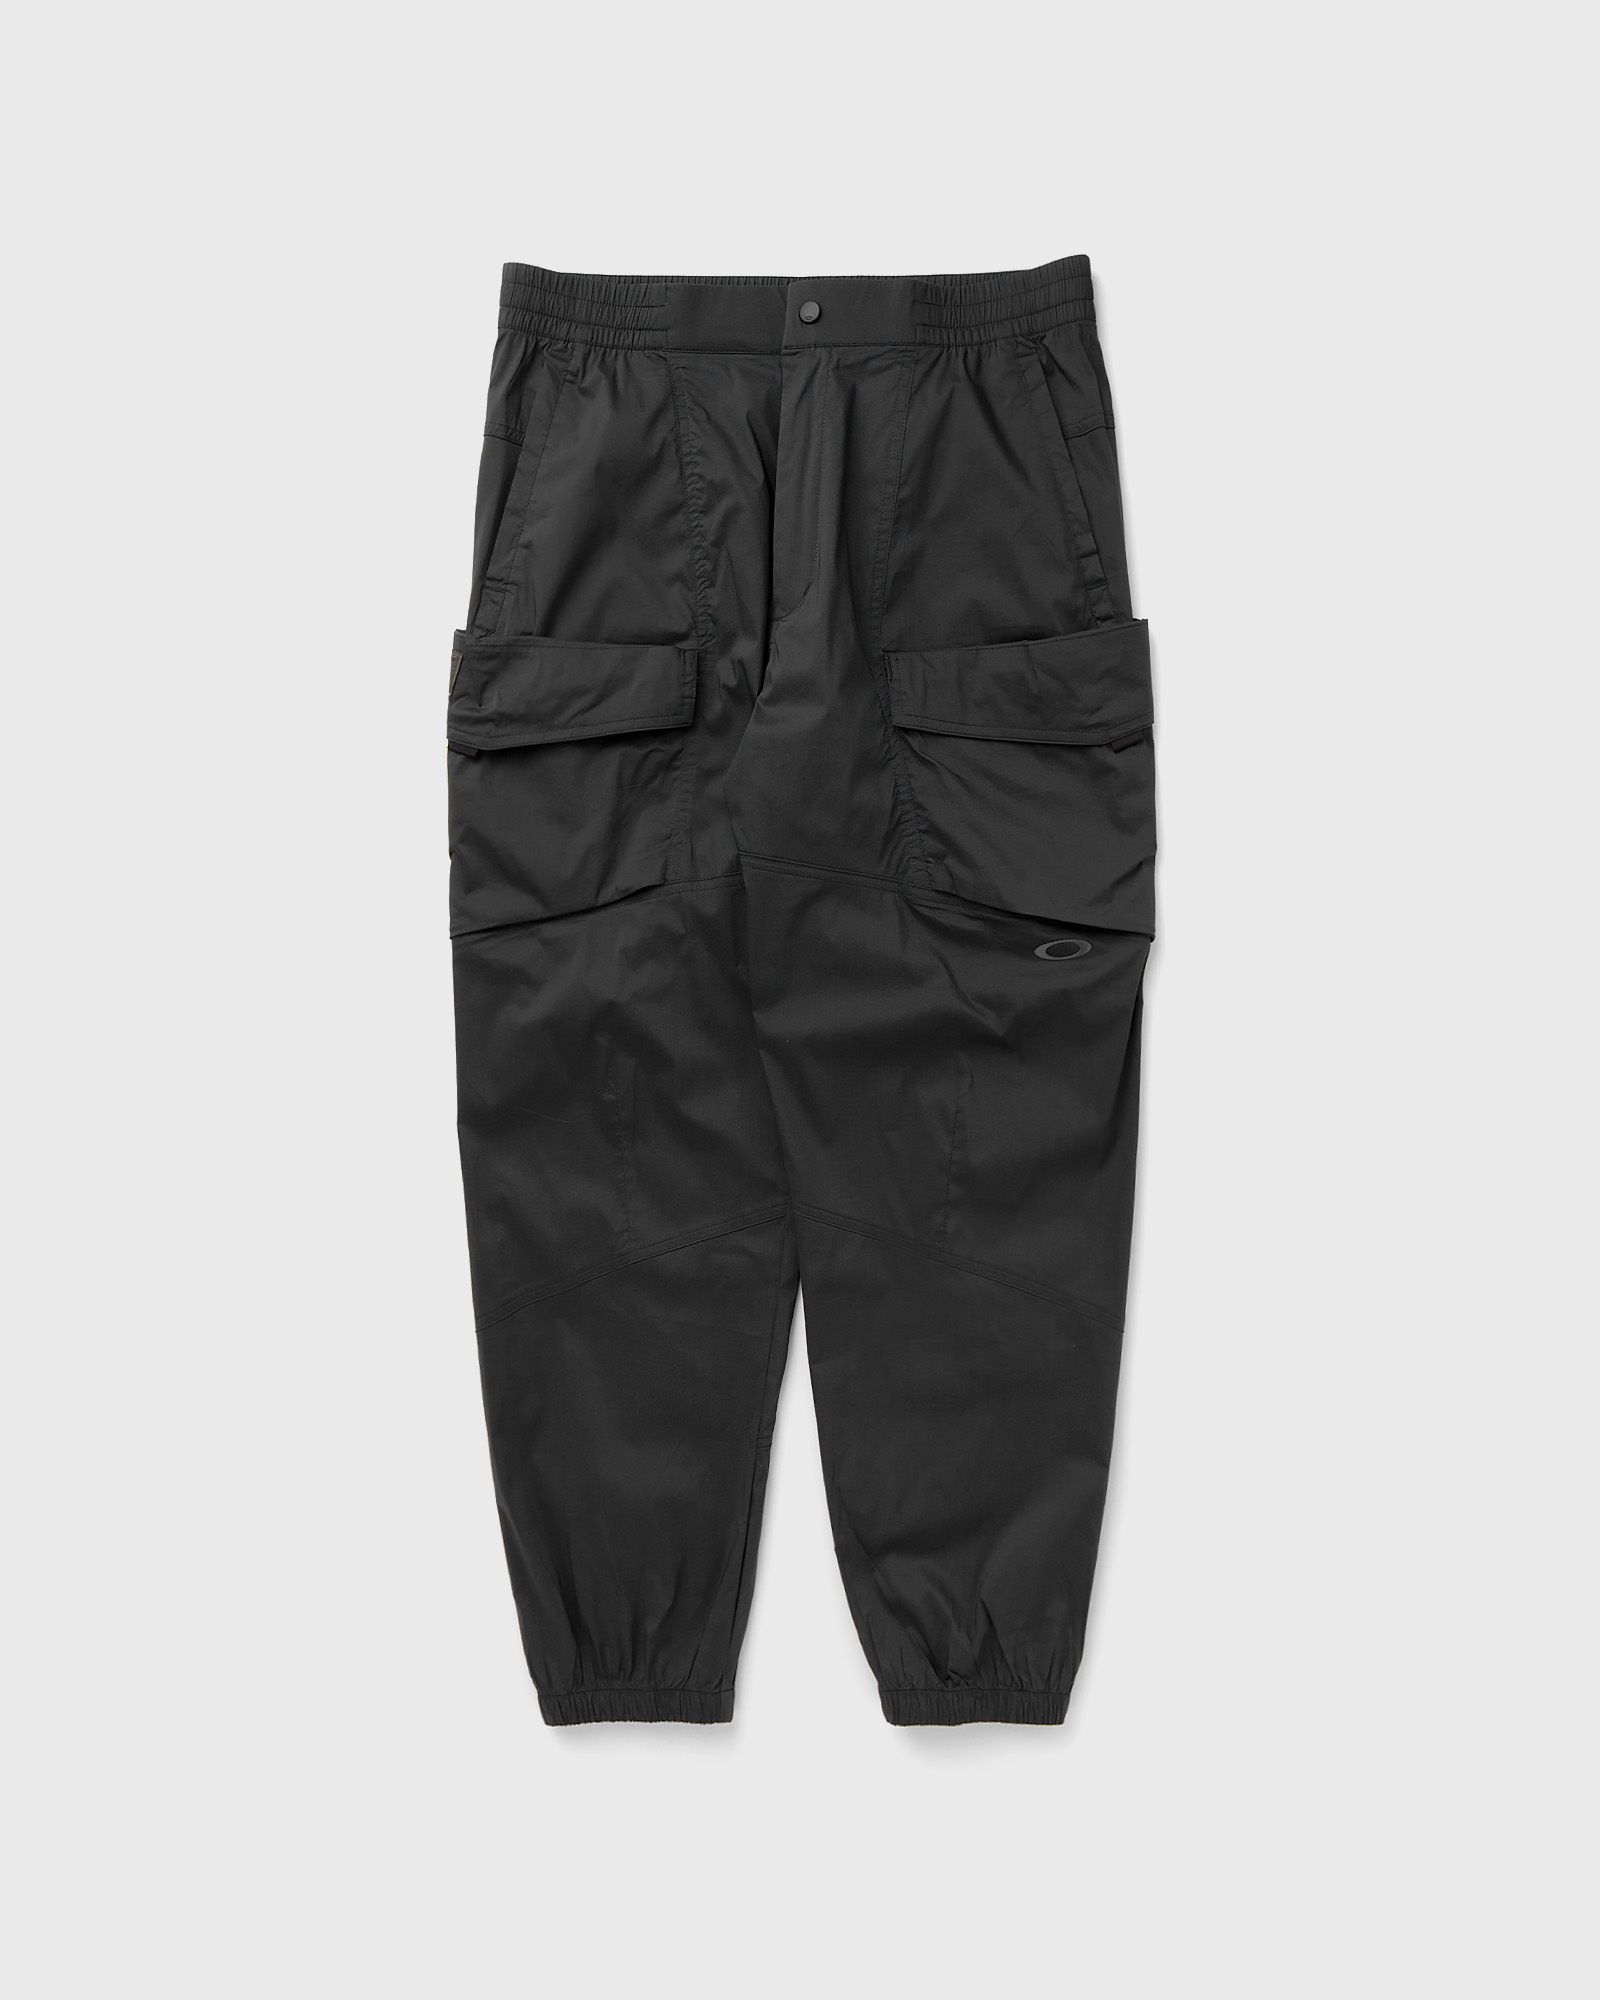 Nike TECH LINED WOVEN PANT Black | BSTN Store